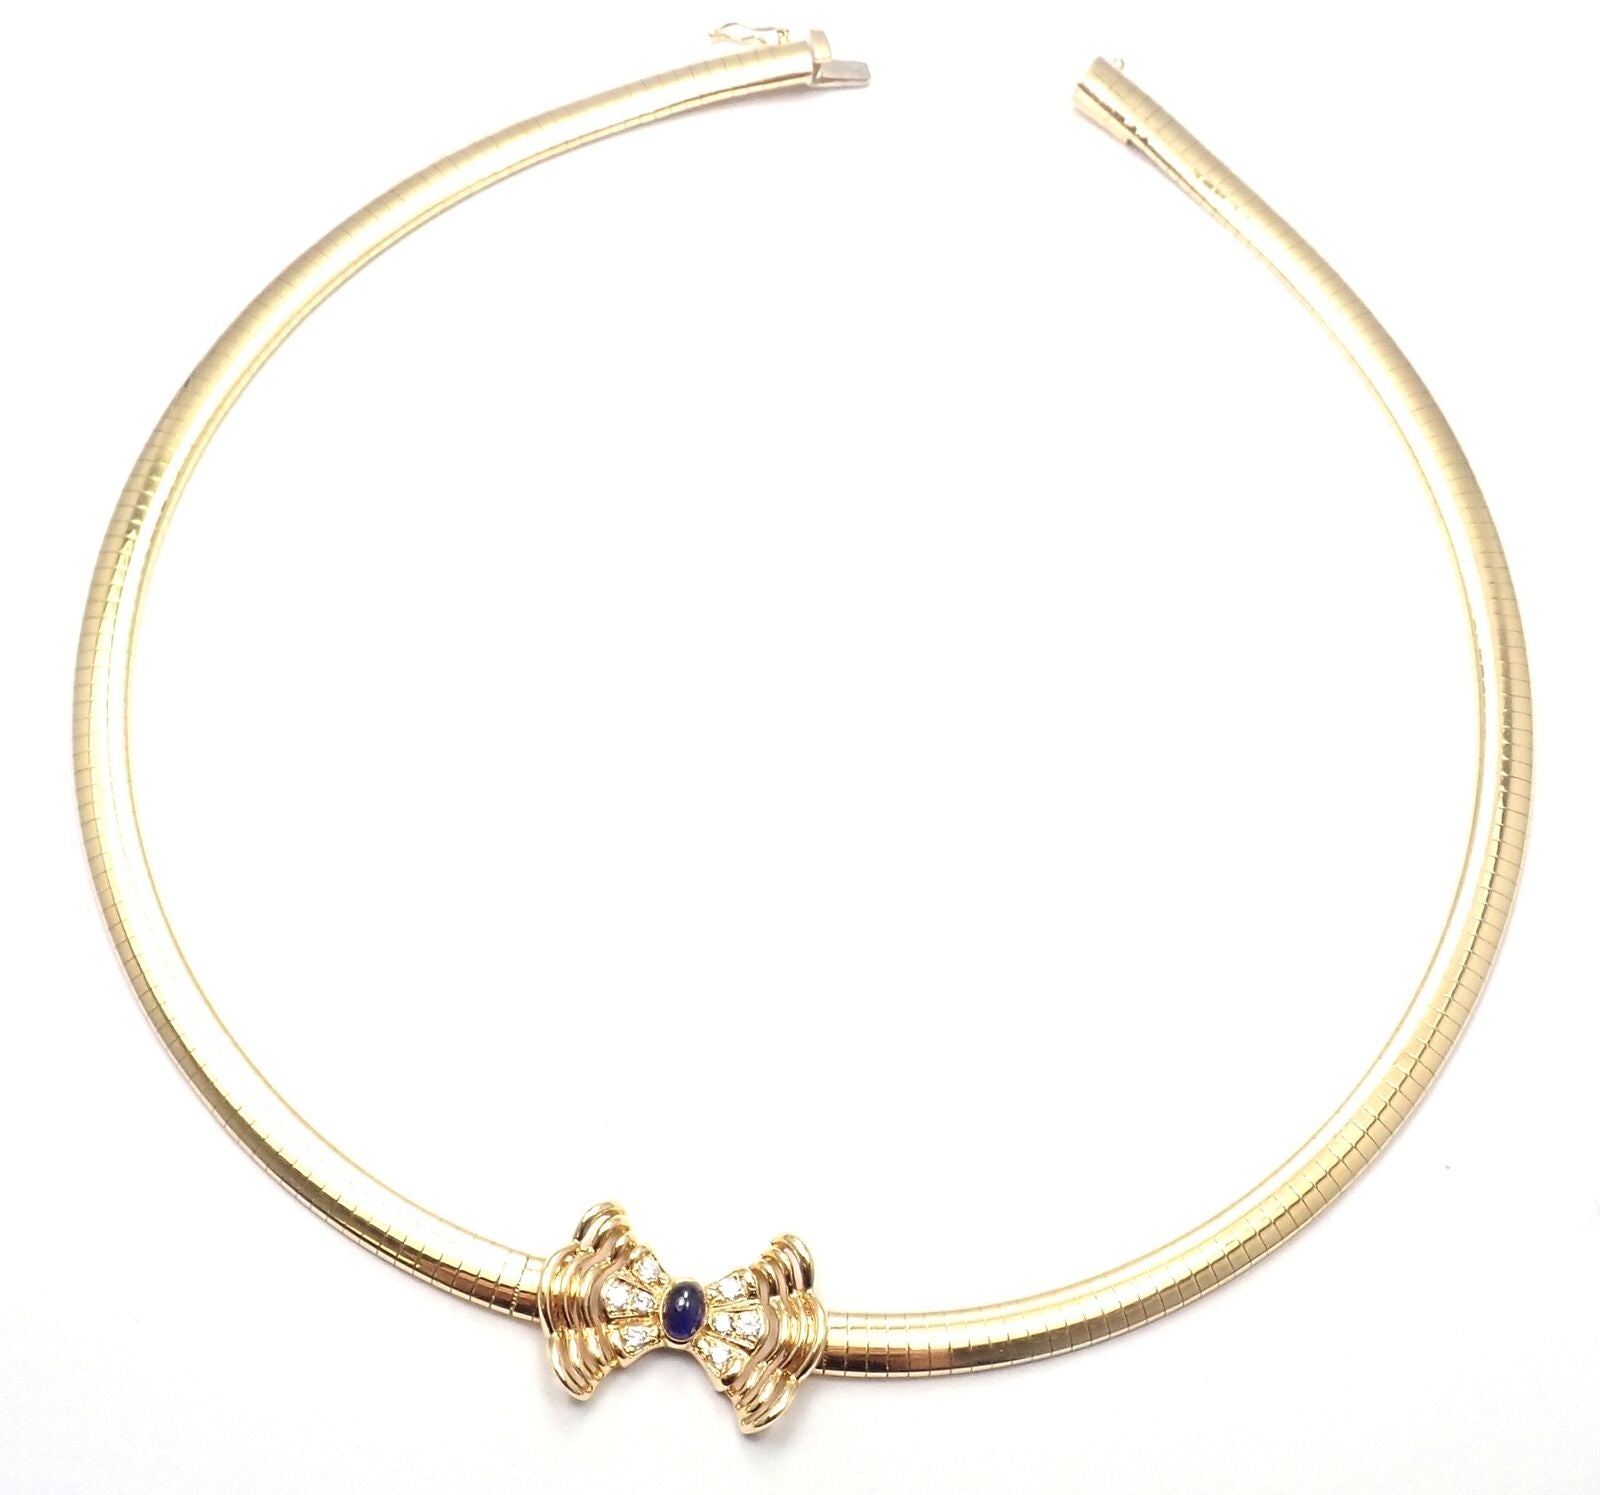 Christian Dior Jewelry & Watches:Fine Jewelry:Necklaces & Pendants Rare! Authentic Christian Dior 18k Yellow Gold Diamond Sapphire Bow Necklace